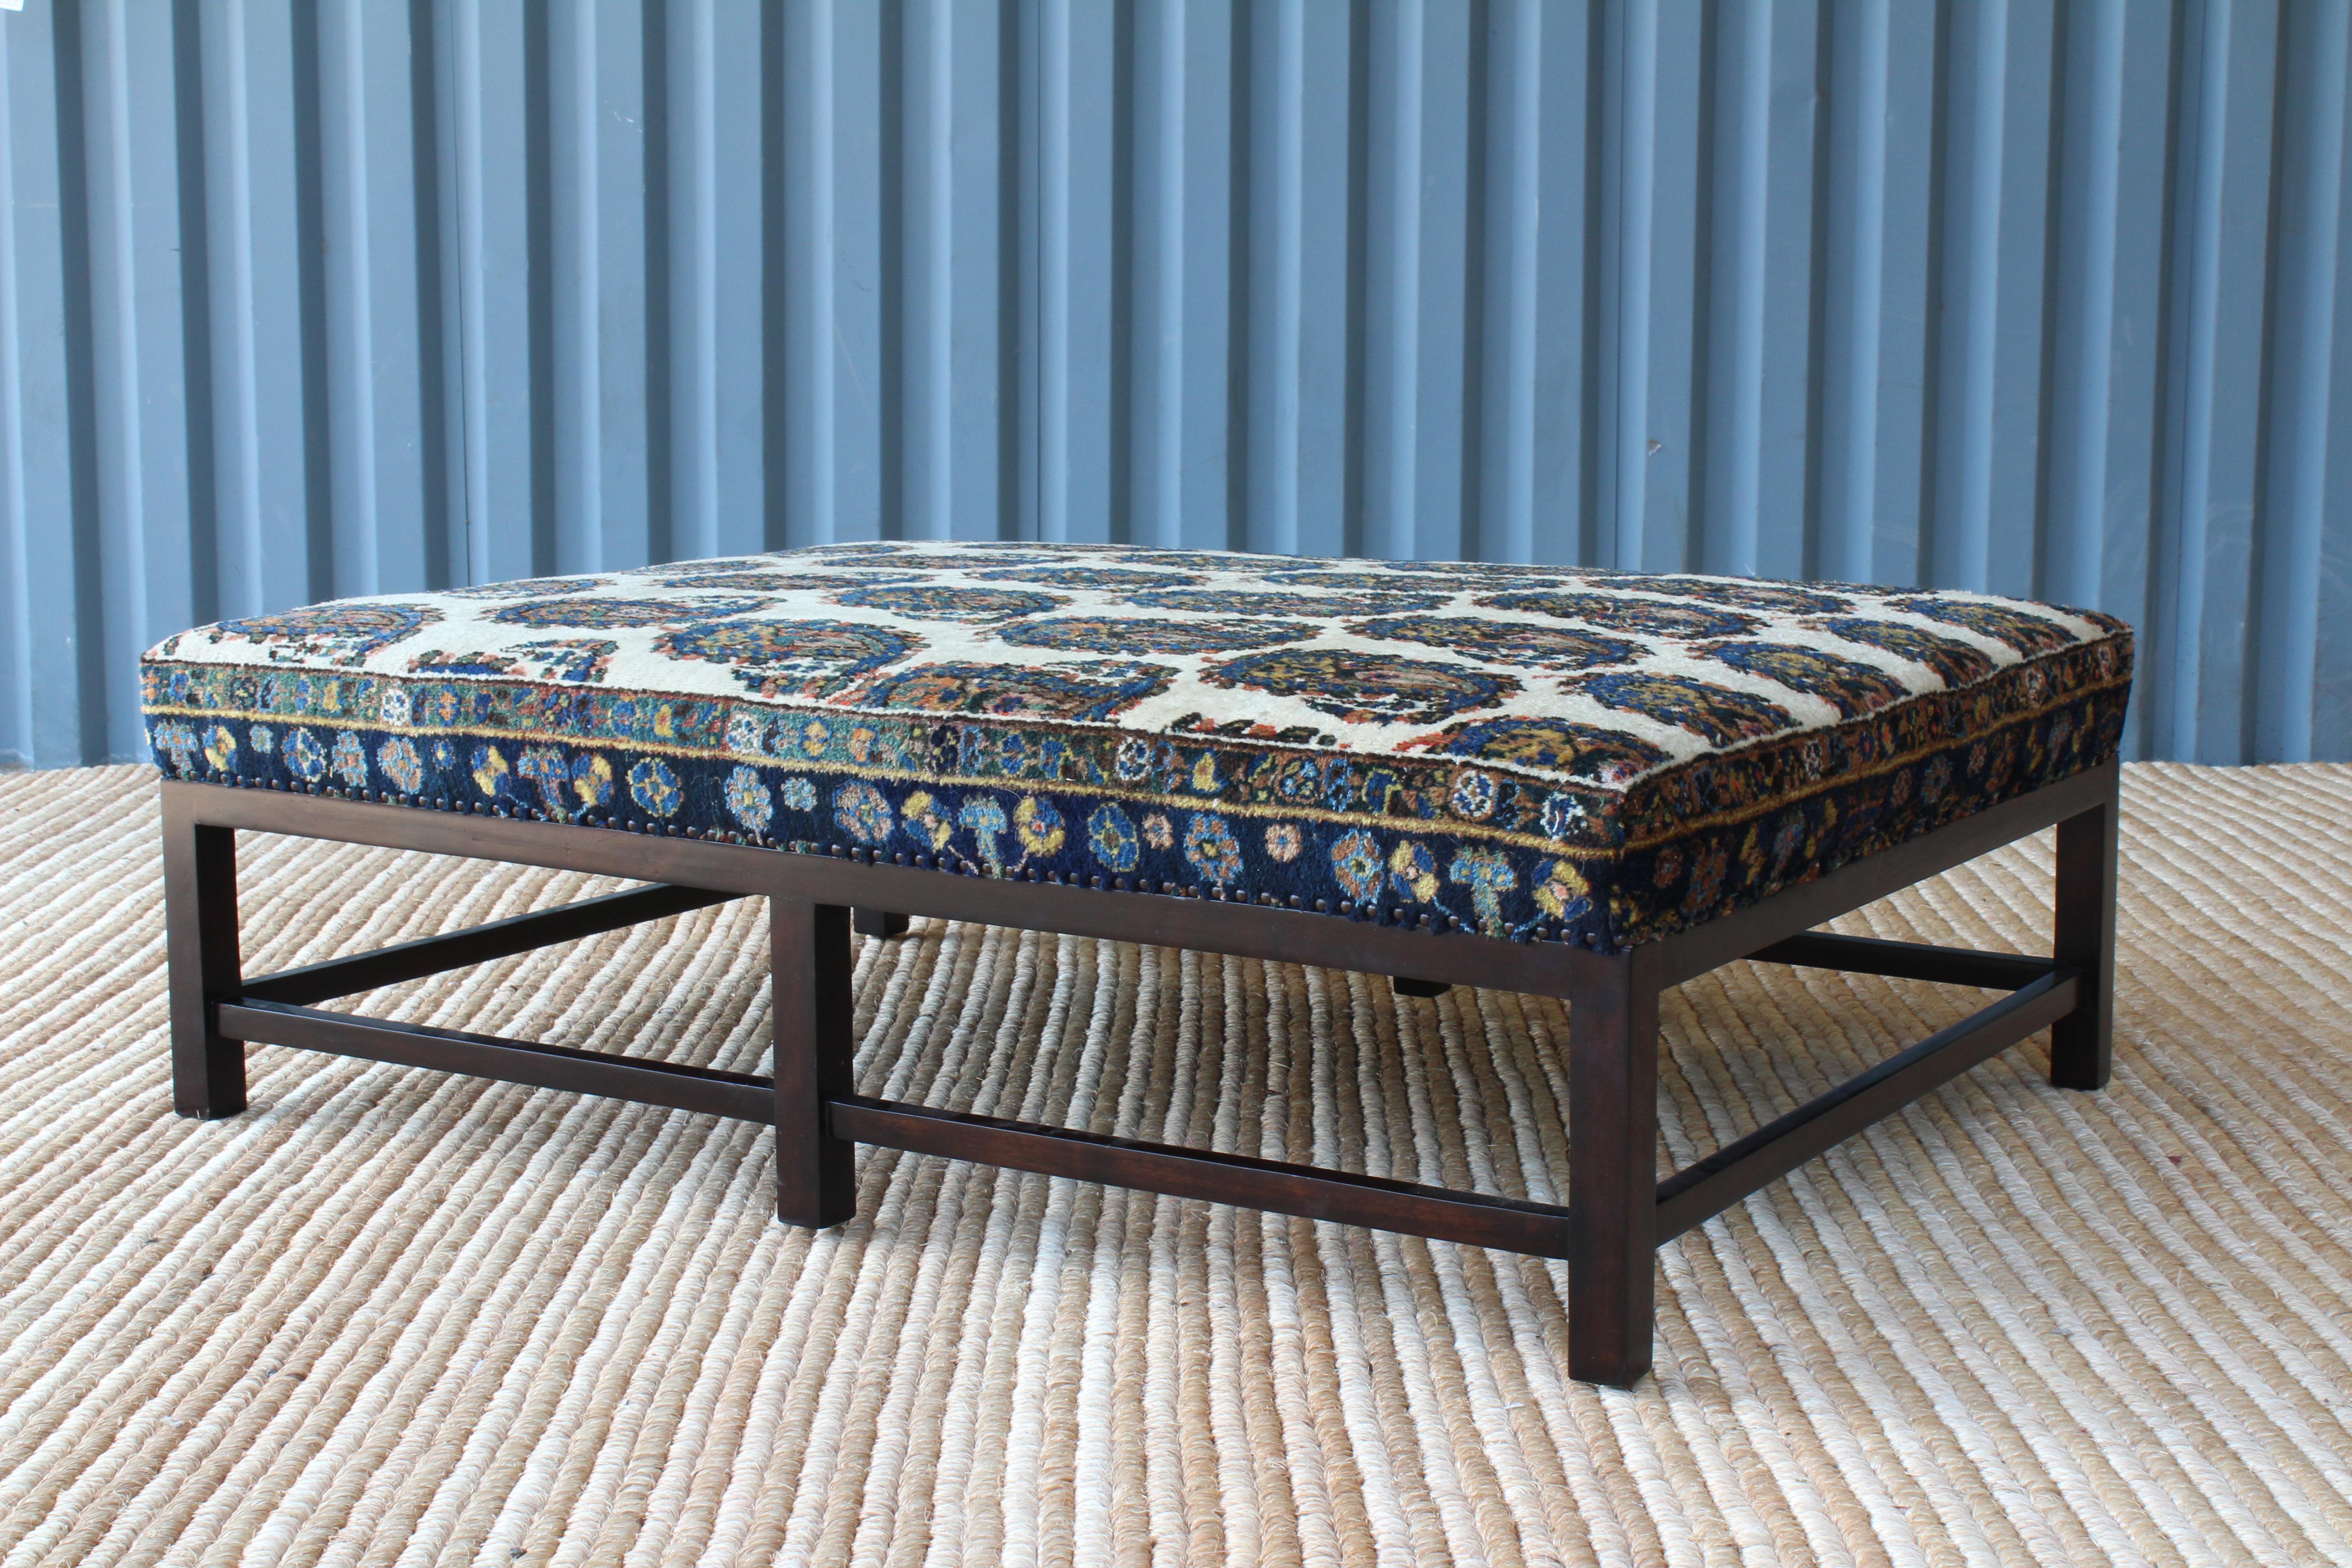 Lexington ottoman by Hollywood at Home, upholstered in a vintage paisley rug.